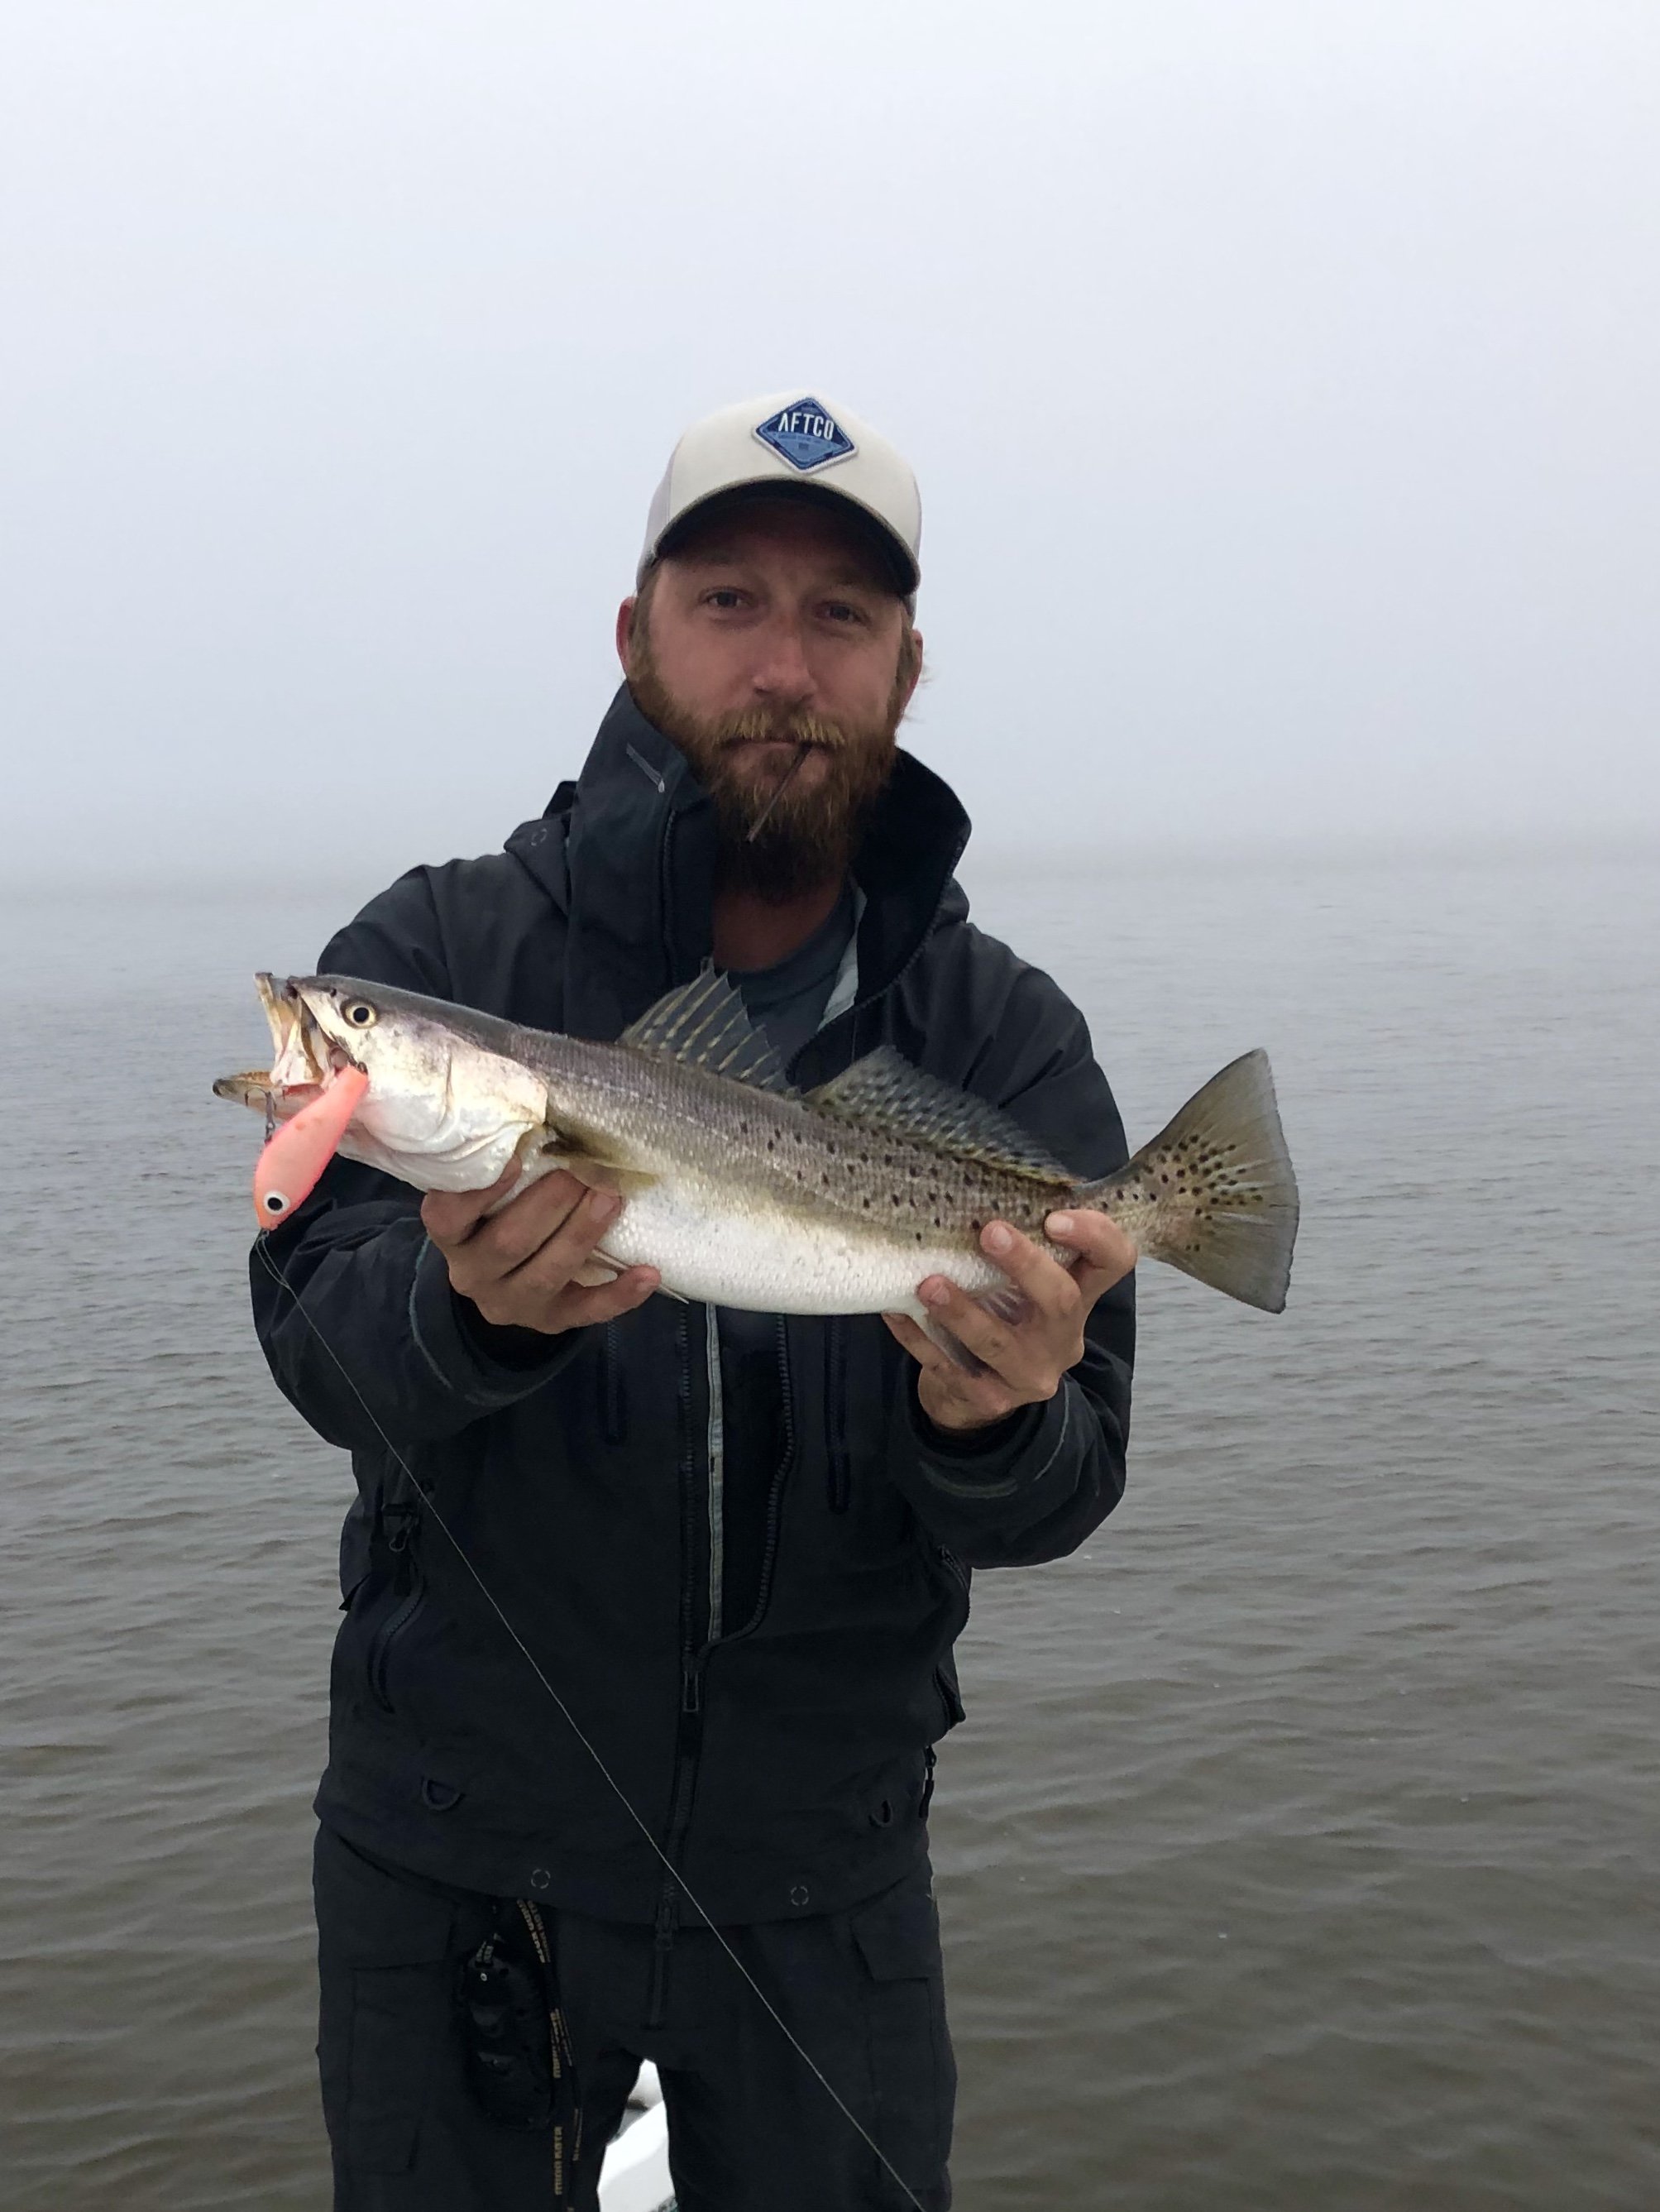 Slamming Speckled Trout in Baffin Bay - Throwing Double D's & Lil John's 